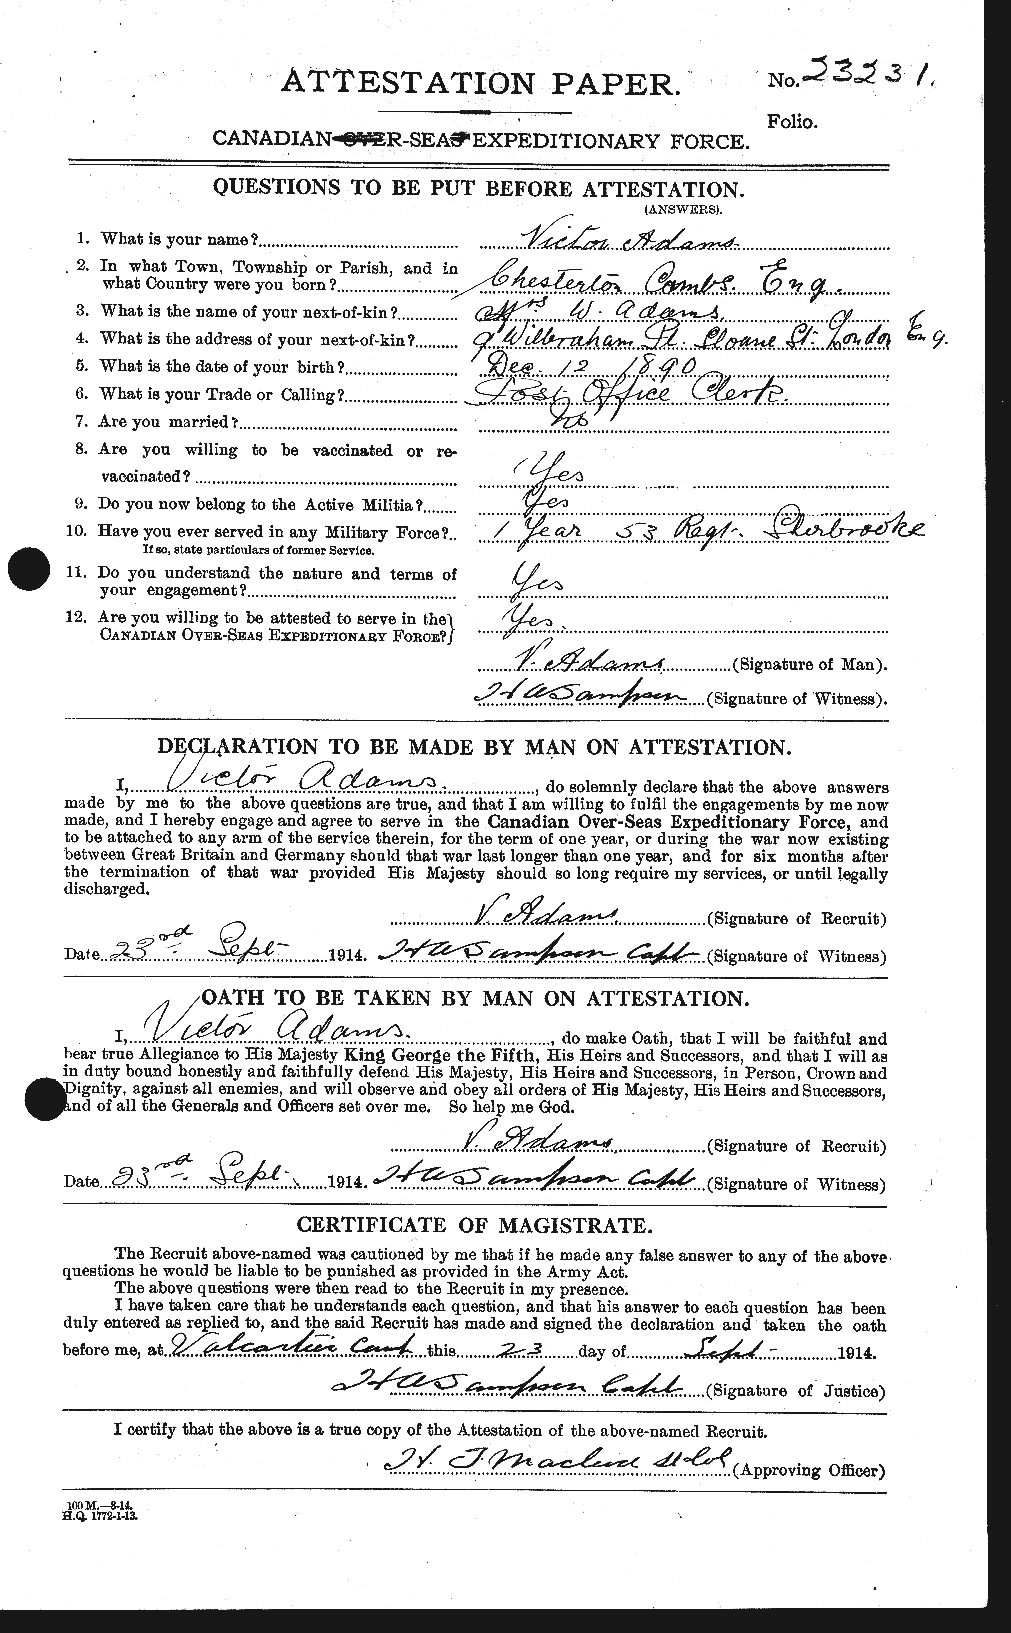 Personnel Records of the First World War - CEF 202183a